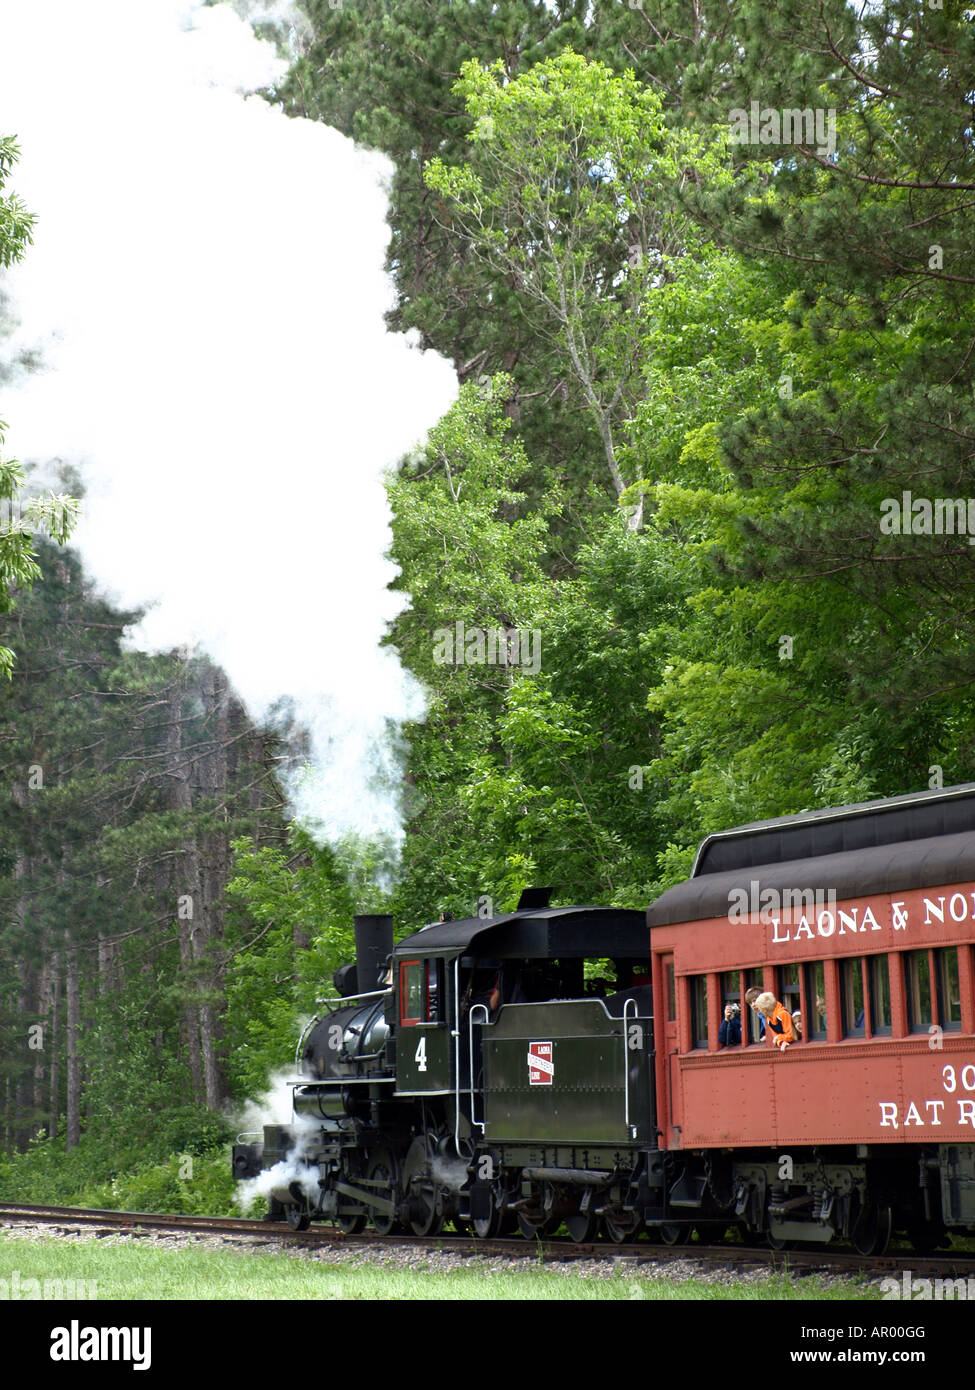 A Steam Engine 4 in Laona Wisconsin carrying passengers through the wooded pine tree landscape Stock Photo